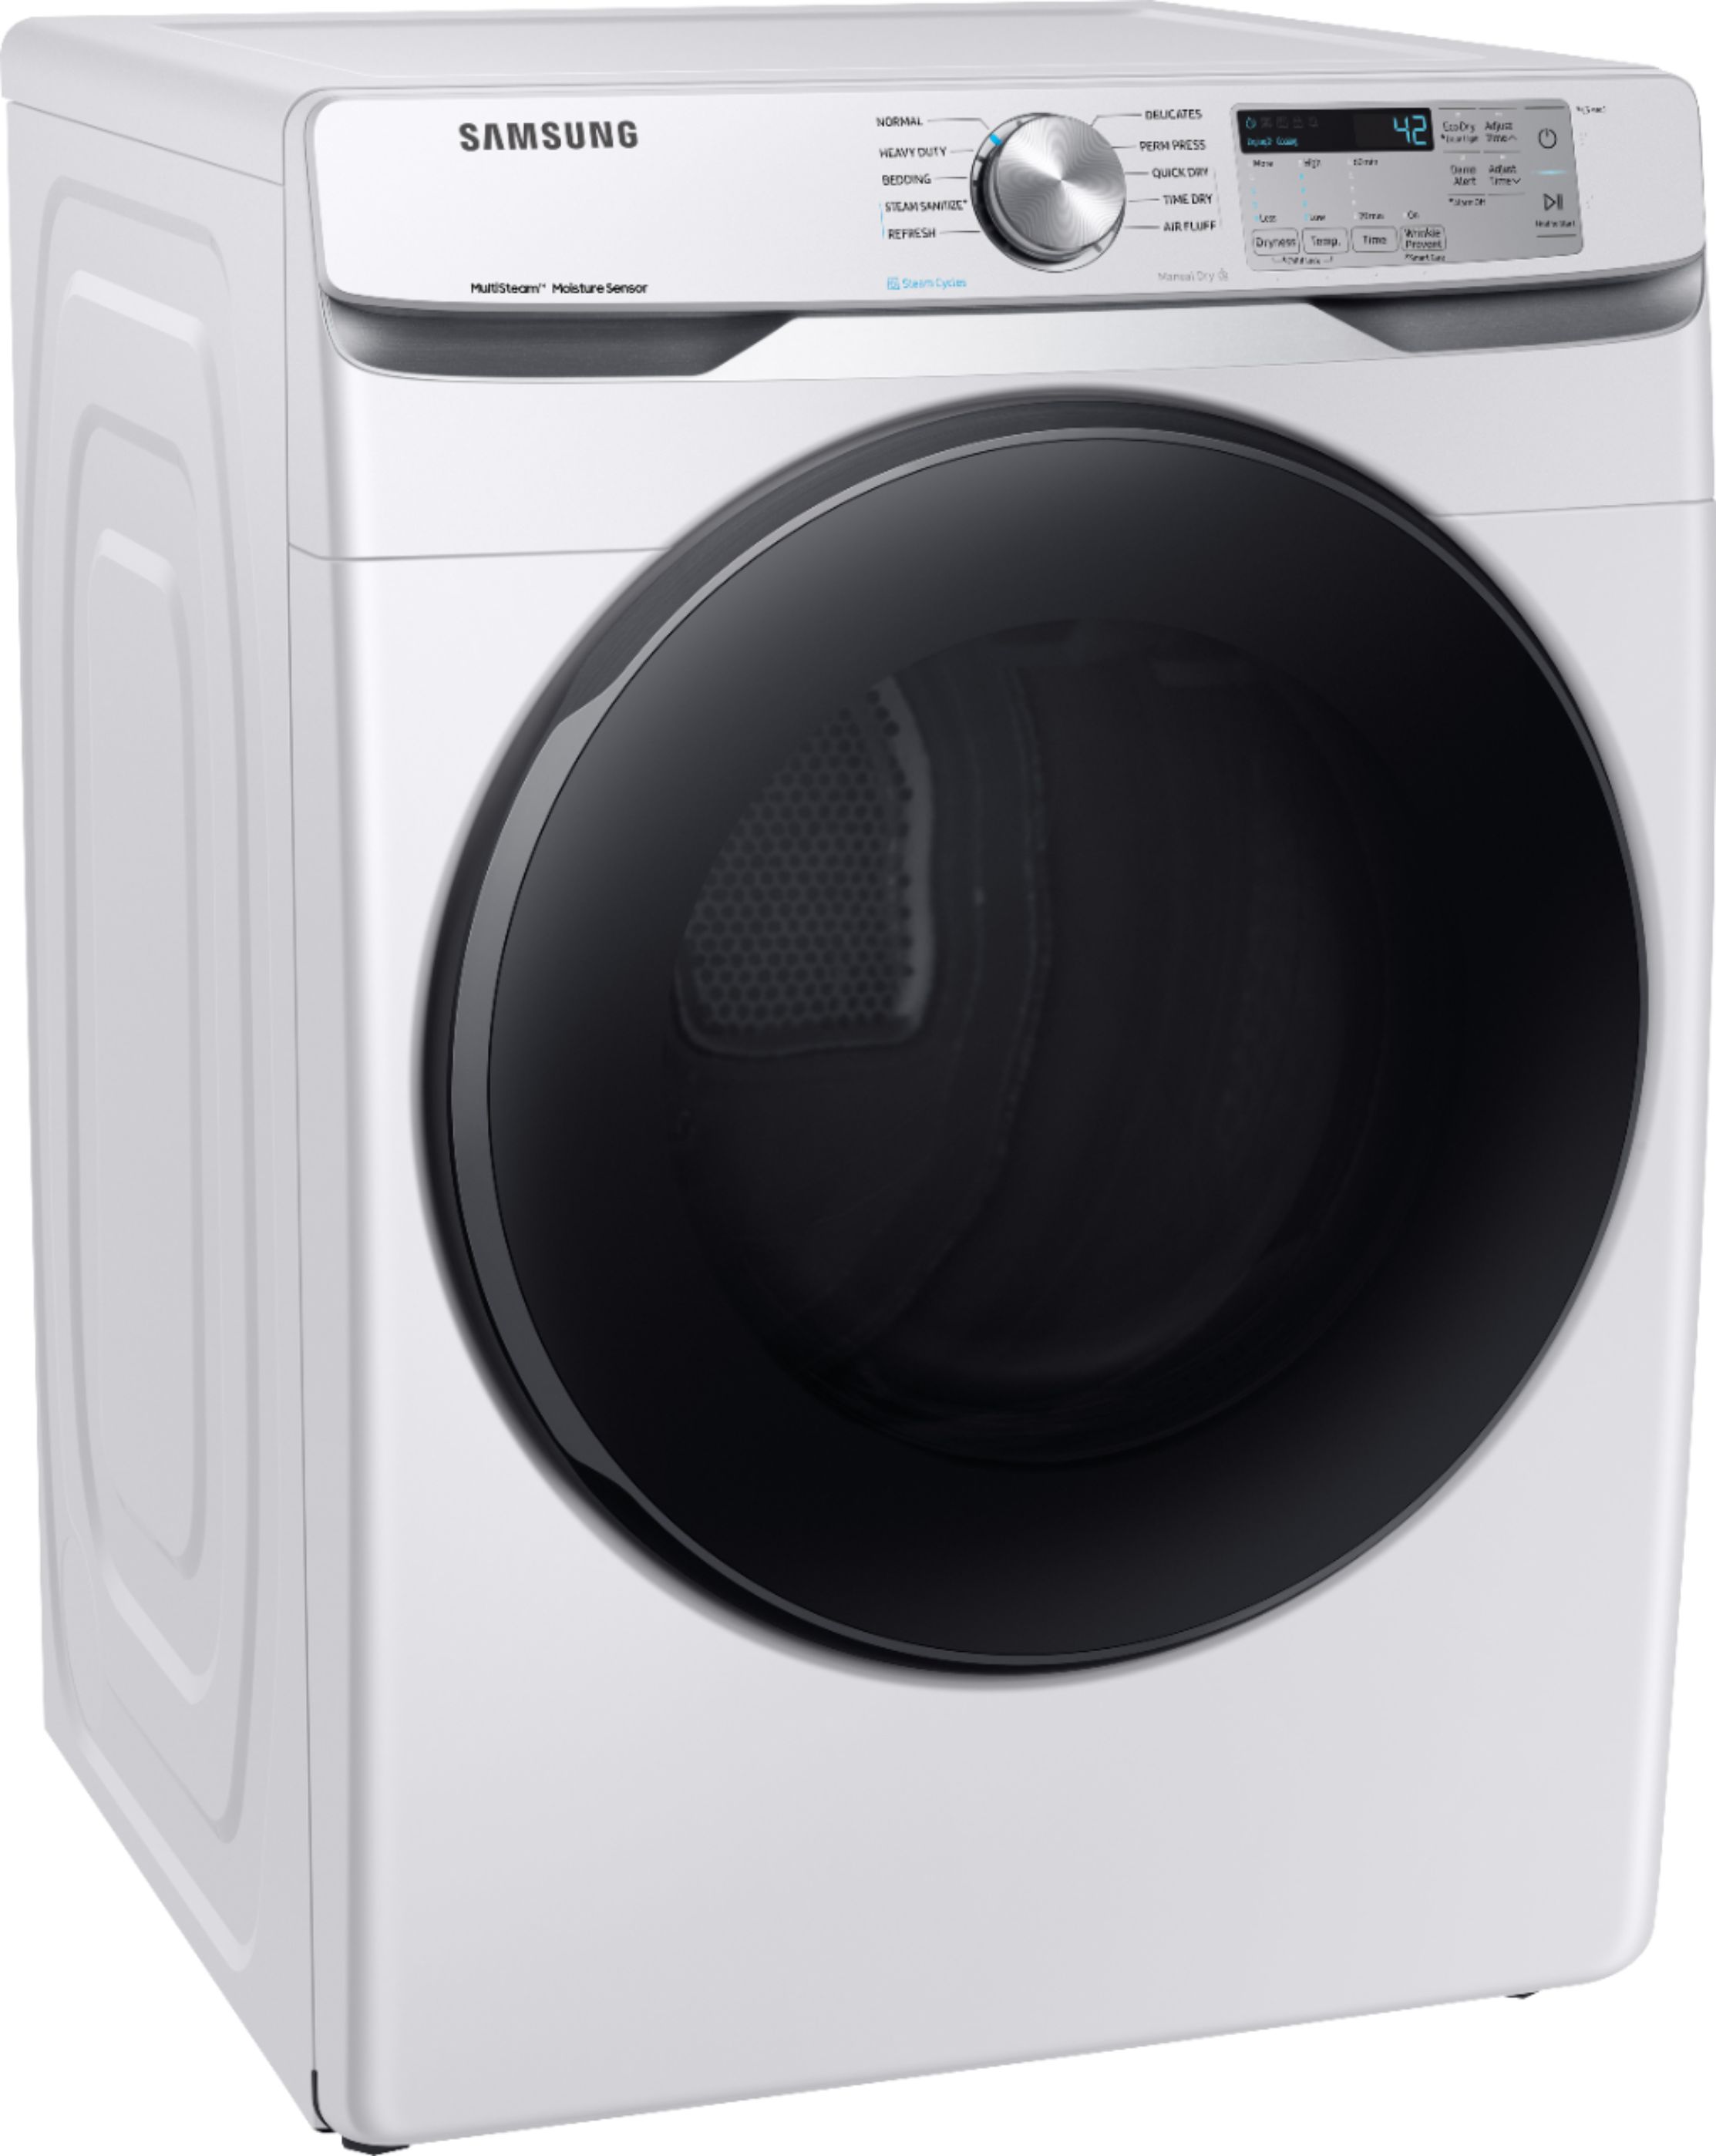 Angle View: Whirlpool - 7.0 Cu. Ft. Gas Dryer with AccuDry Sensor Drying System - White